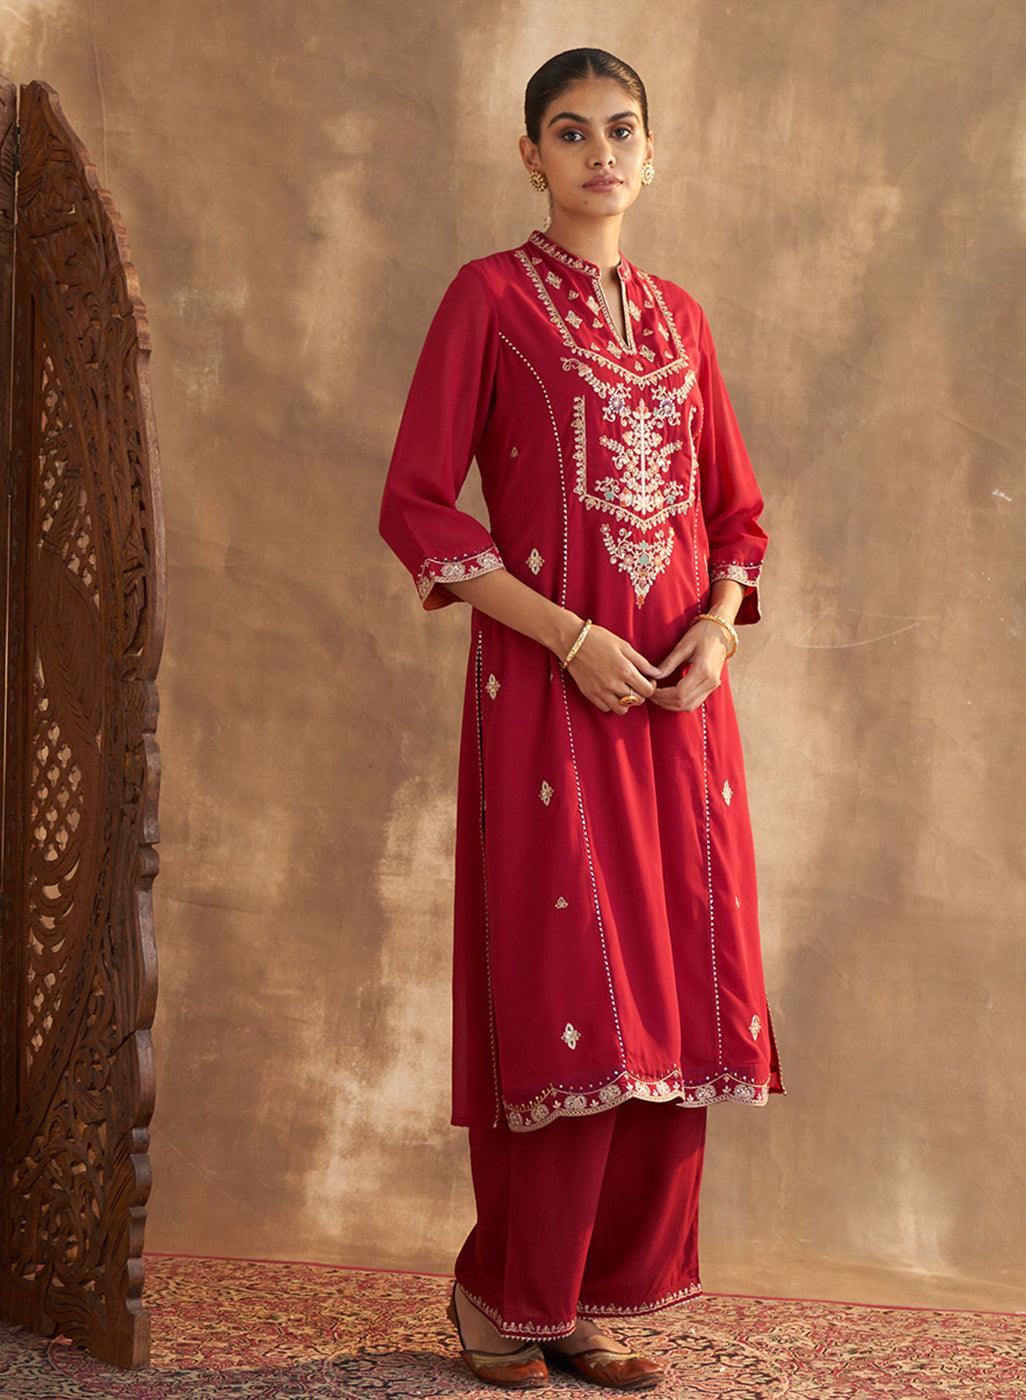 Red Ethnic Wear For Women, Red Embroidered Clothing